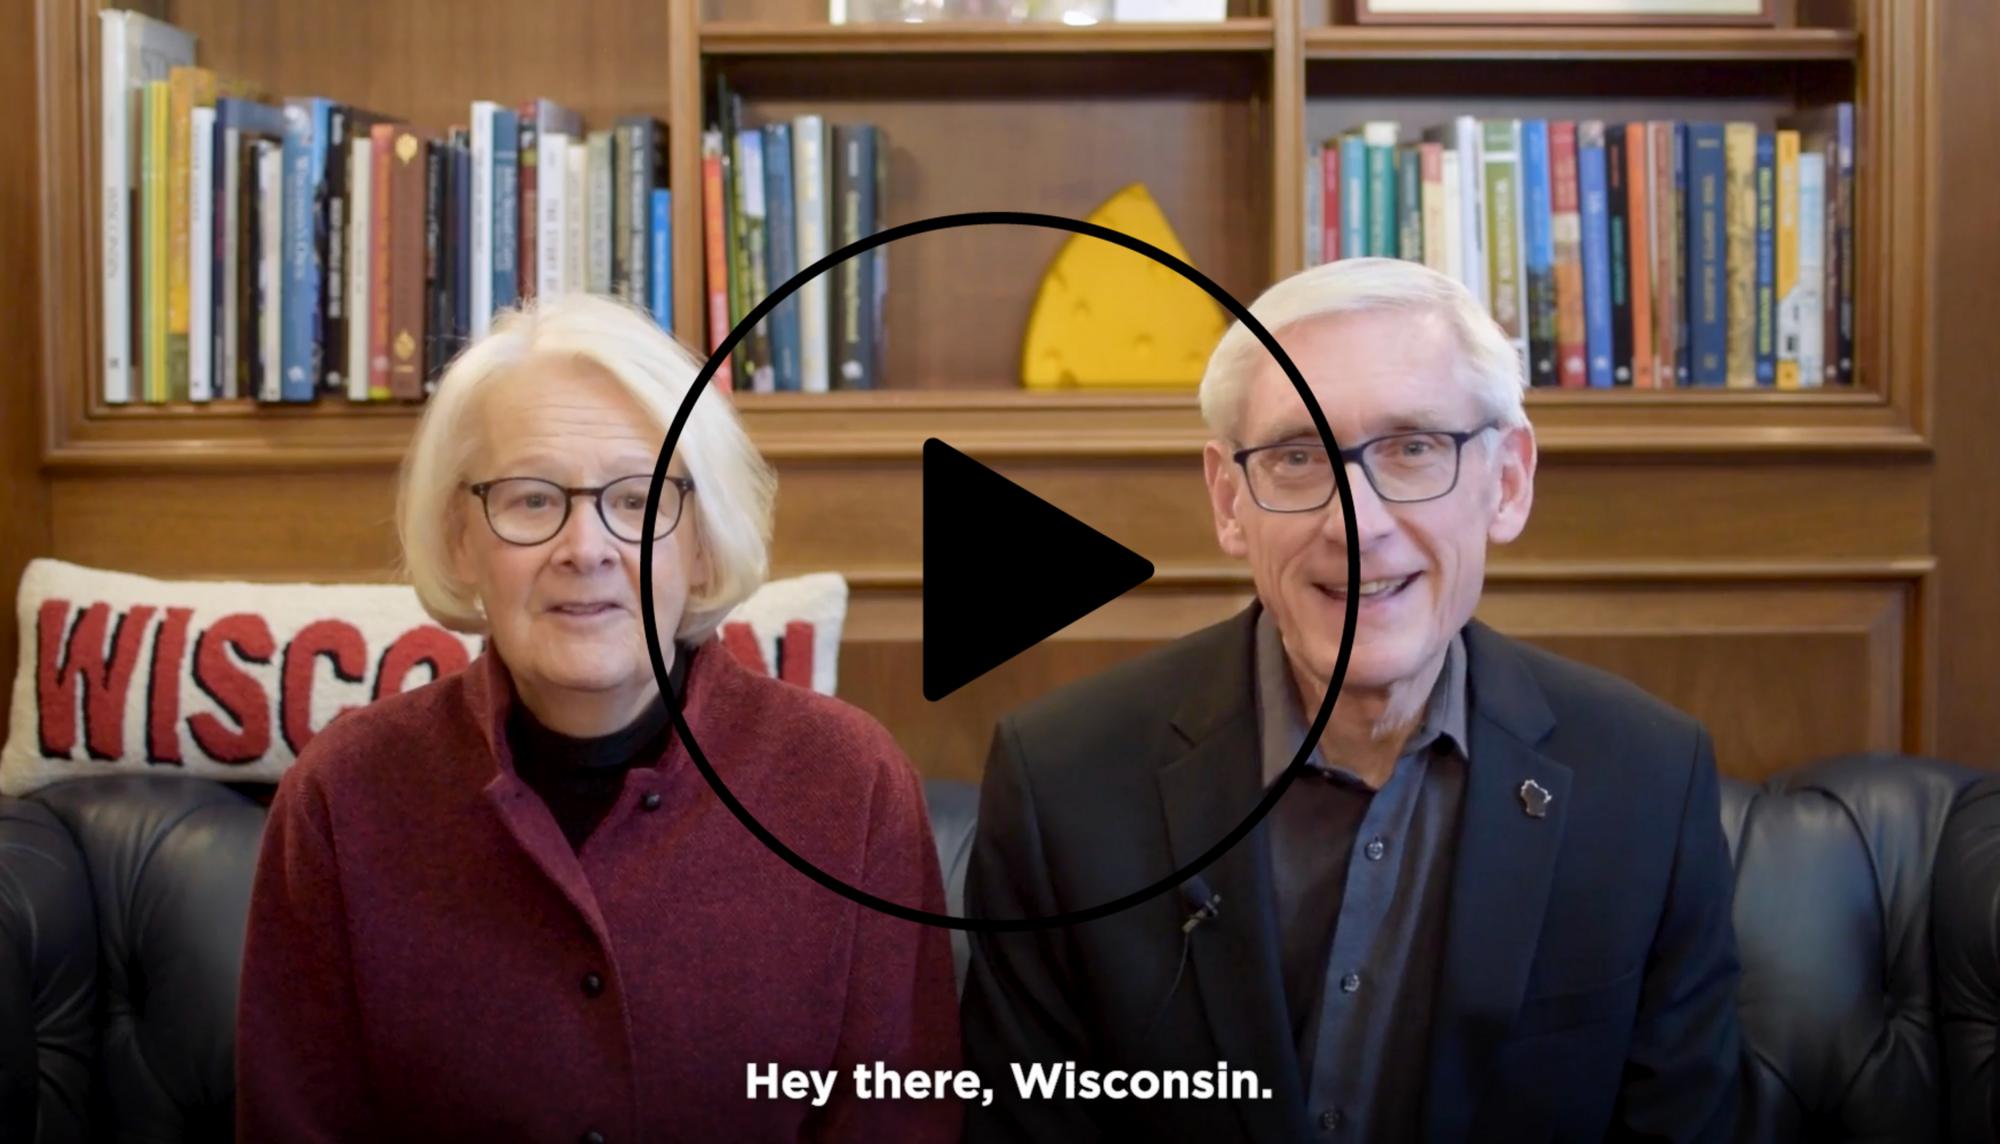 Gov. Evers, First Lady Encourage Wisconsinites to Take Care of Mental Health During the Holiday Season